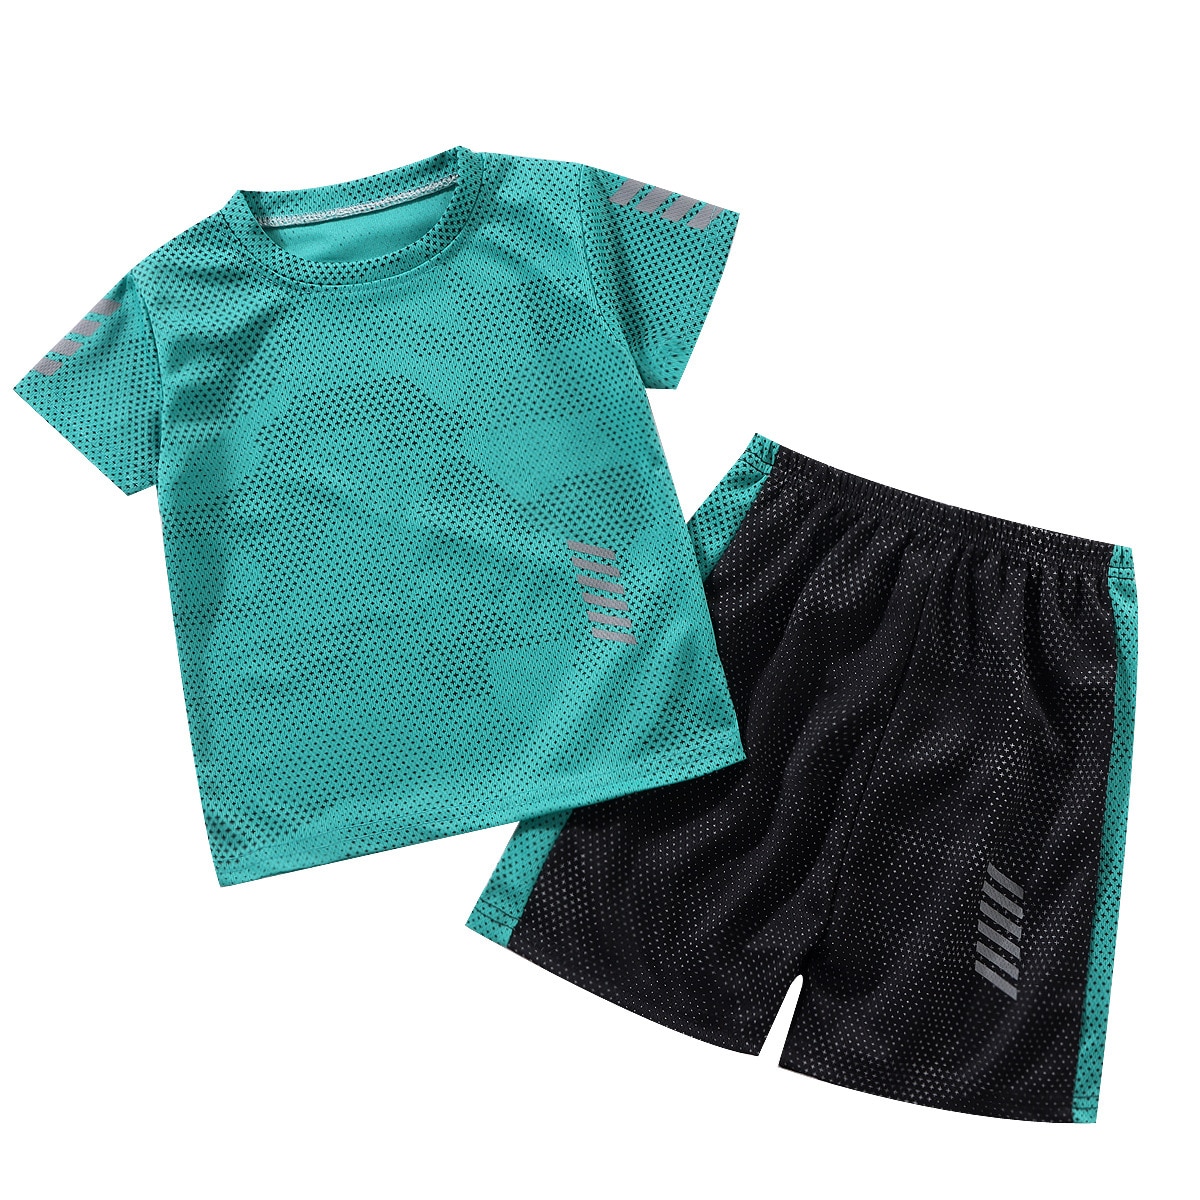 Summer Boys Clothing Sets Quick Drying Sports Suits For Kids Children's Short-sleeve Clothes Sets Teenager Tracksuits 2pcs/set